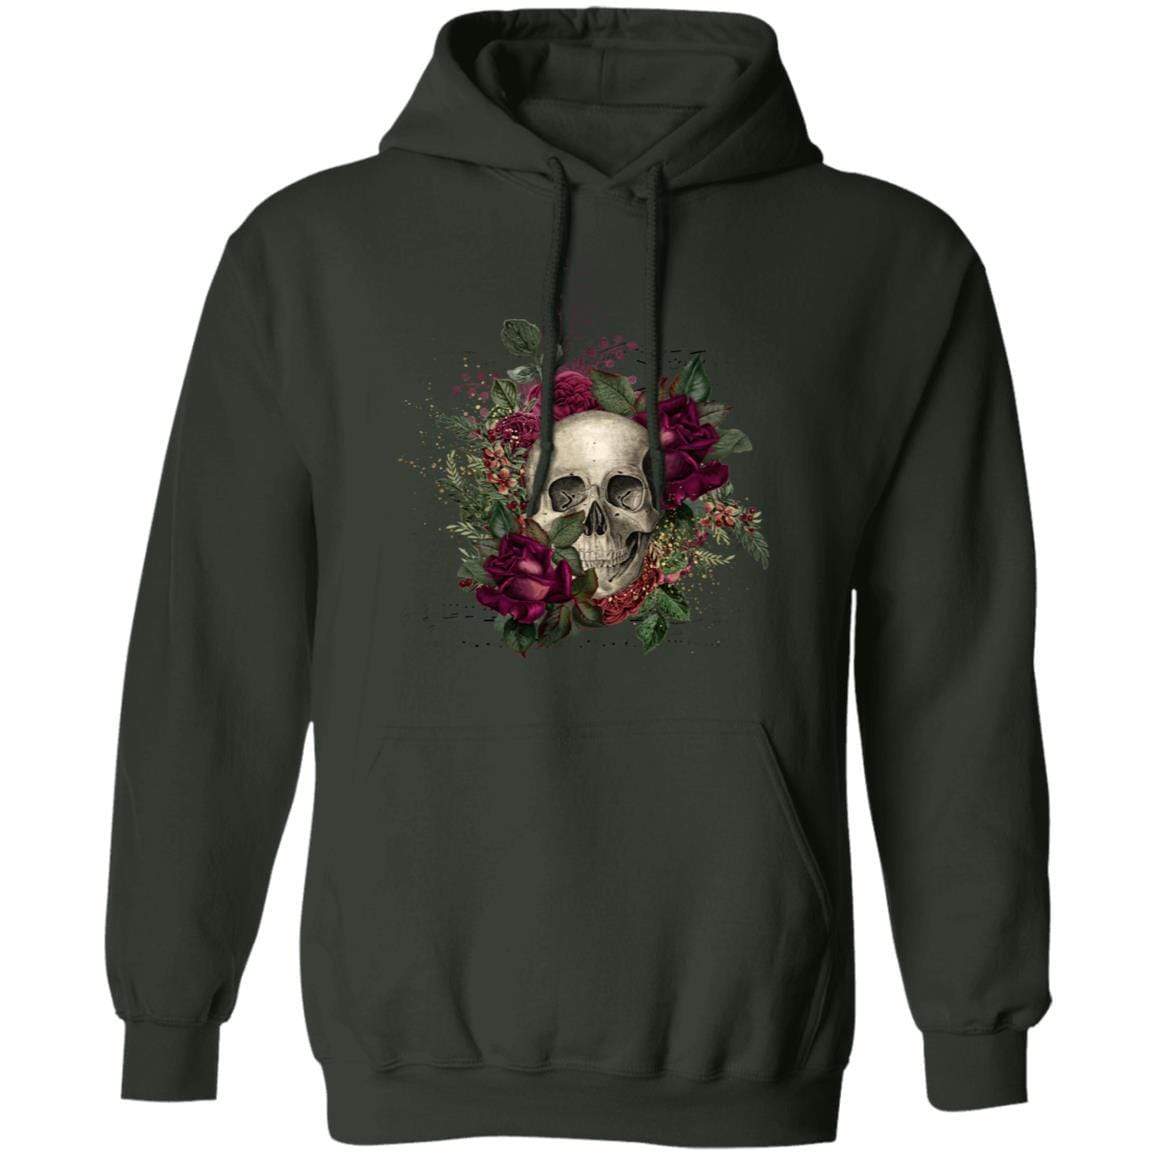 Sweatshirts Forest Green / S Winey Bitches Co Floral Skull Design #2 Pullover Hoodie 8 oz. WineyBitchesCo